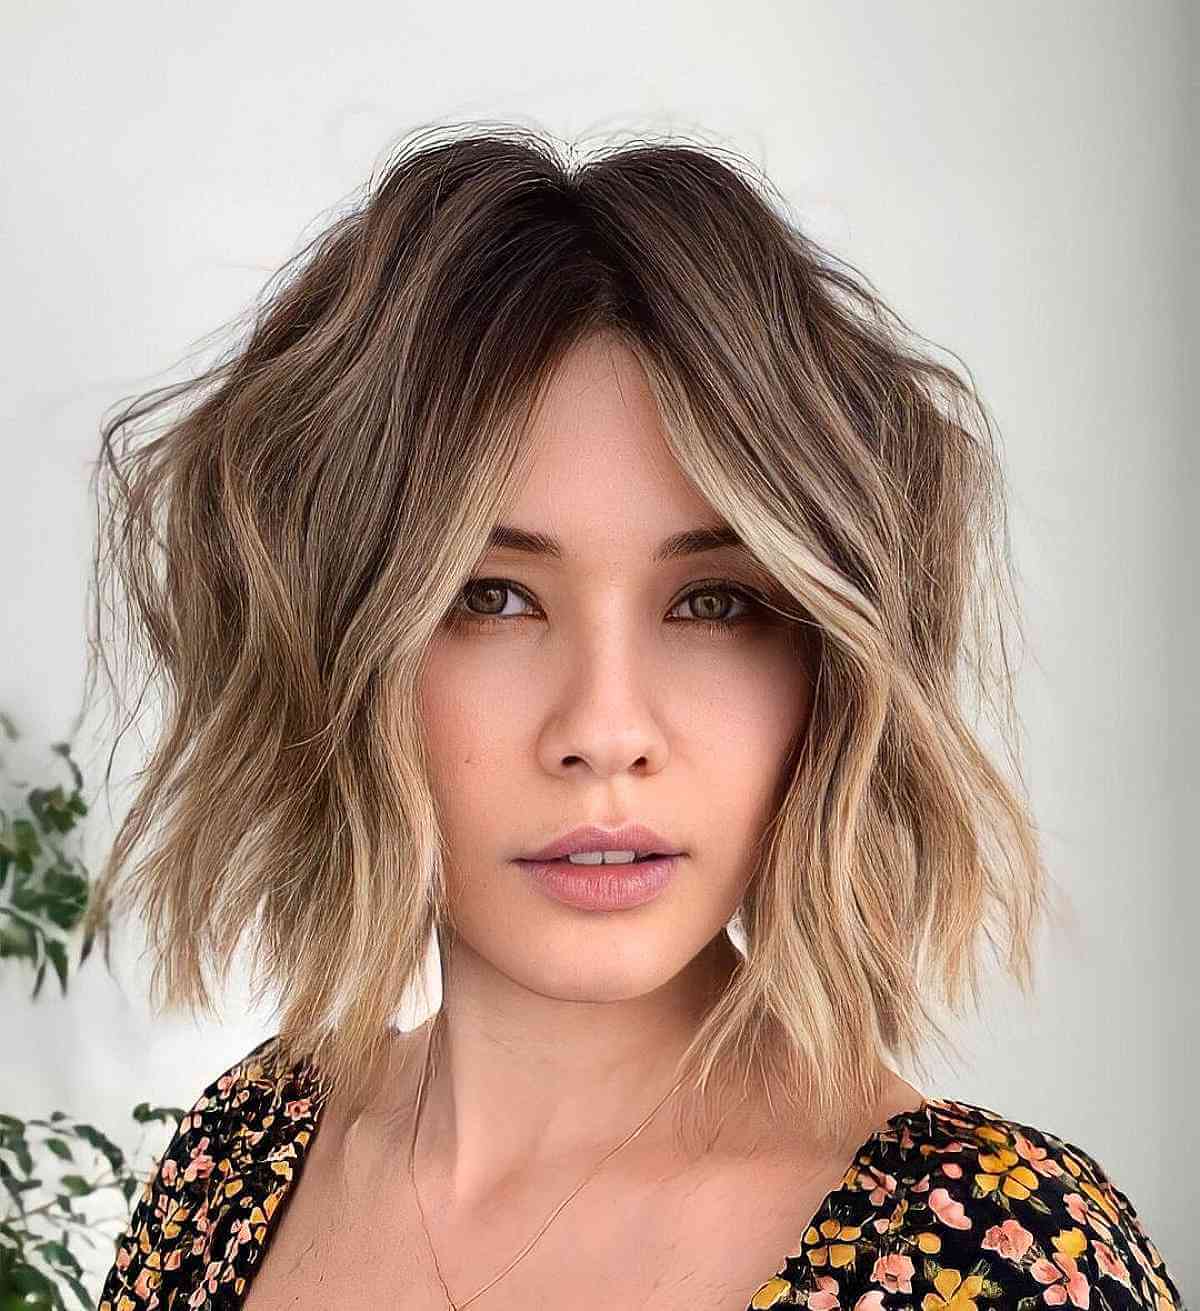 Short Fluffy Hair: 17 Ways to Pull Off This Cute Hair Trend